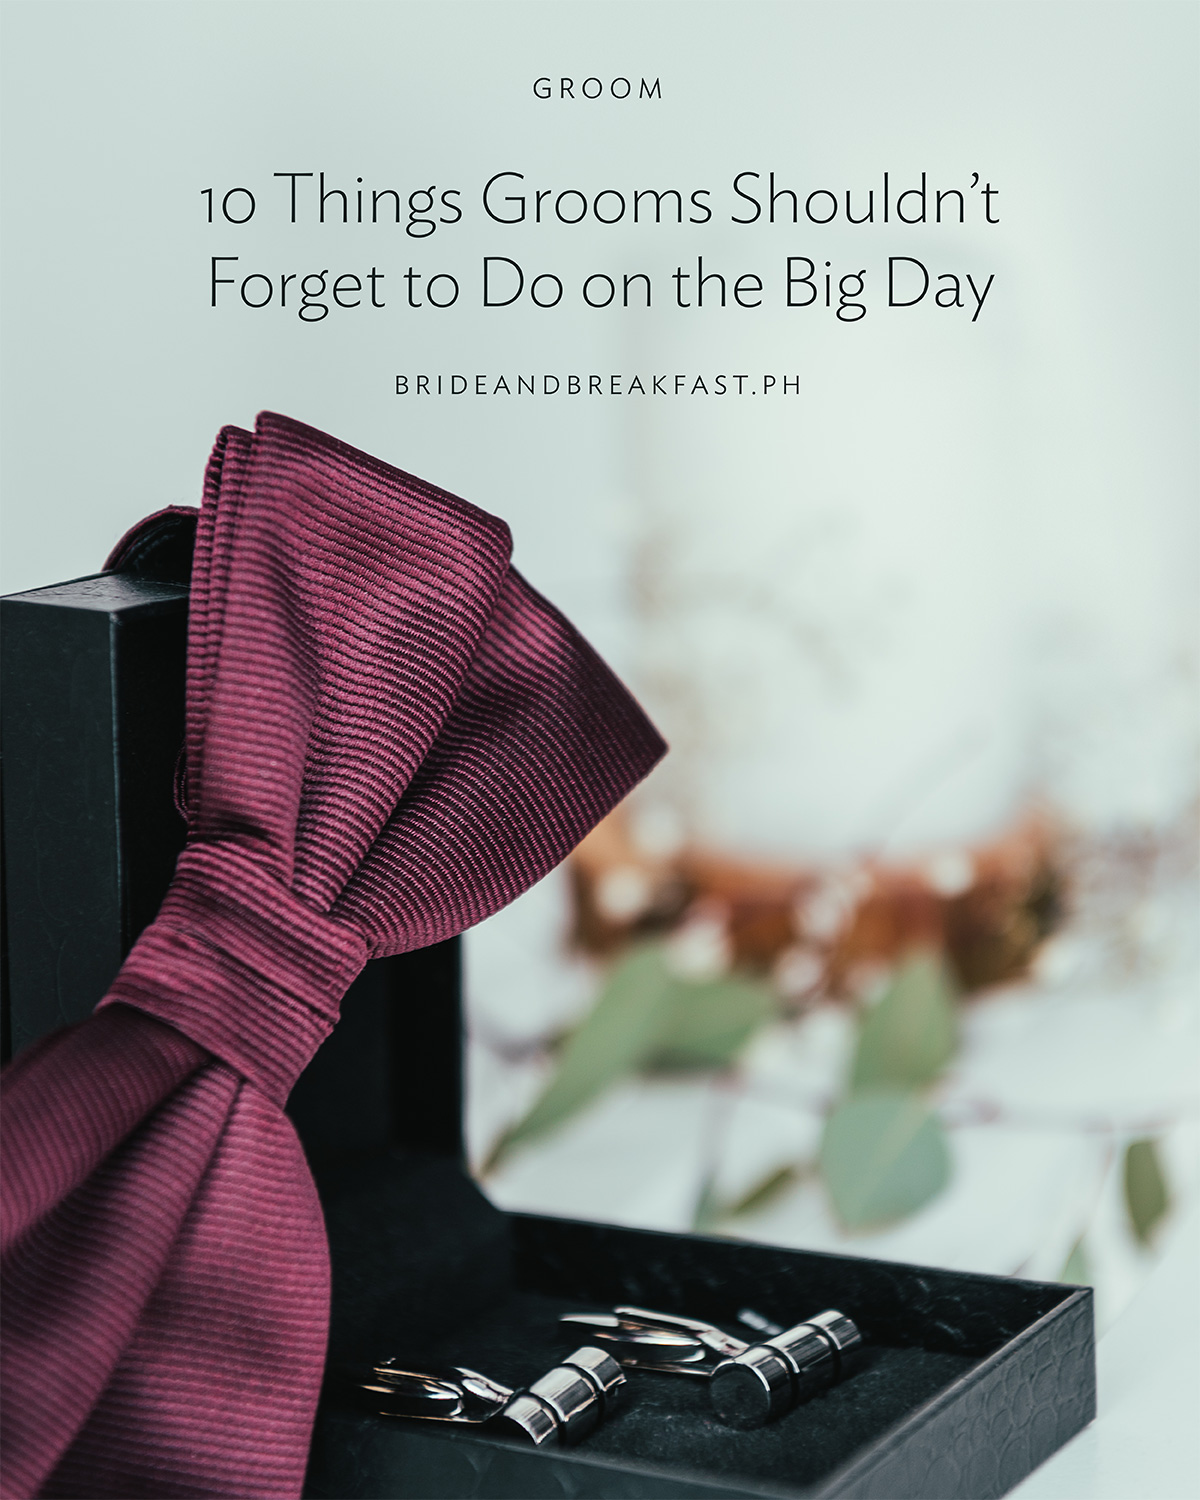 10 Things Grooms Shouldn’t Forget to Do on the Big Day